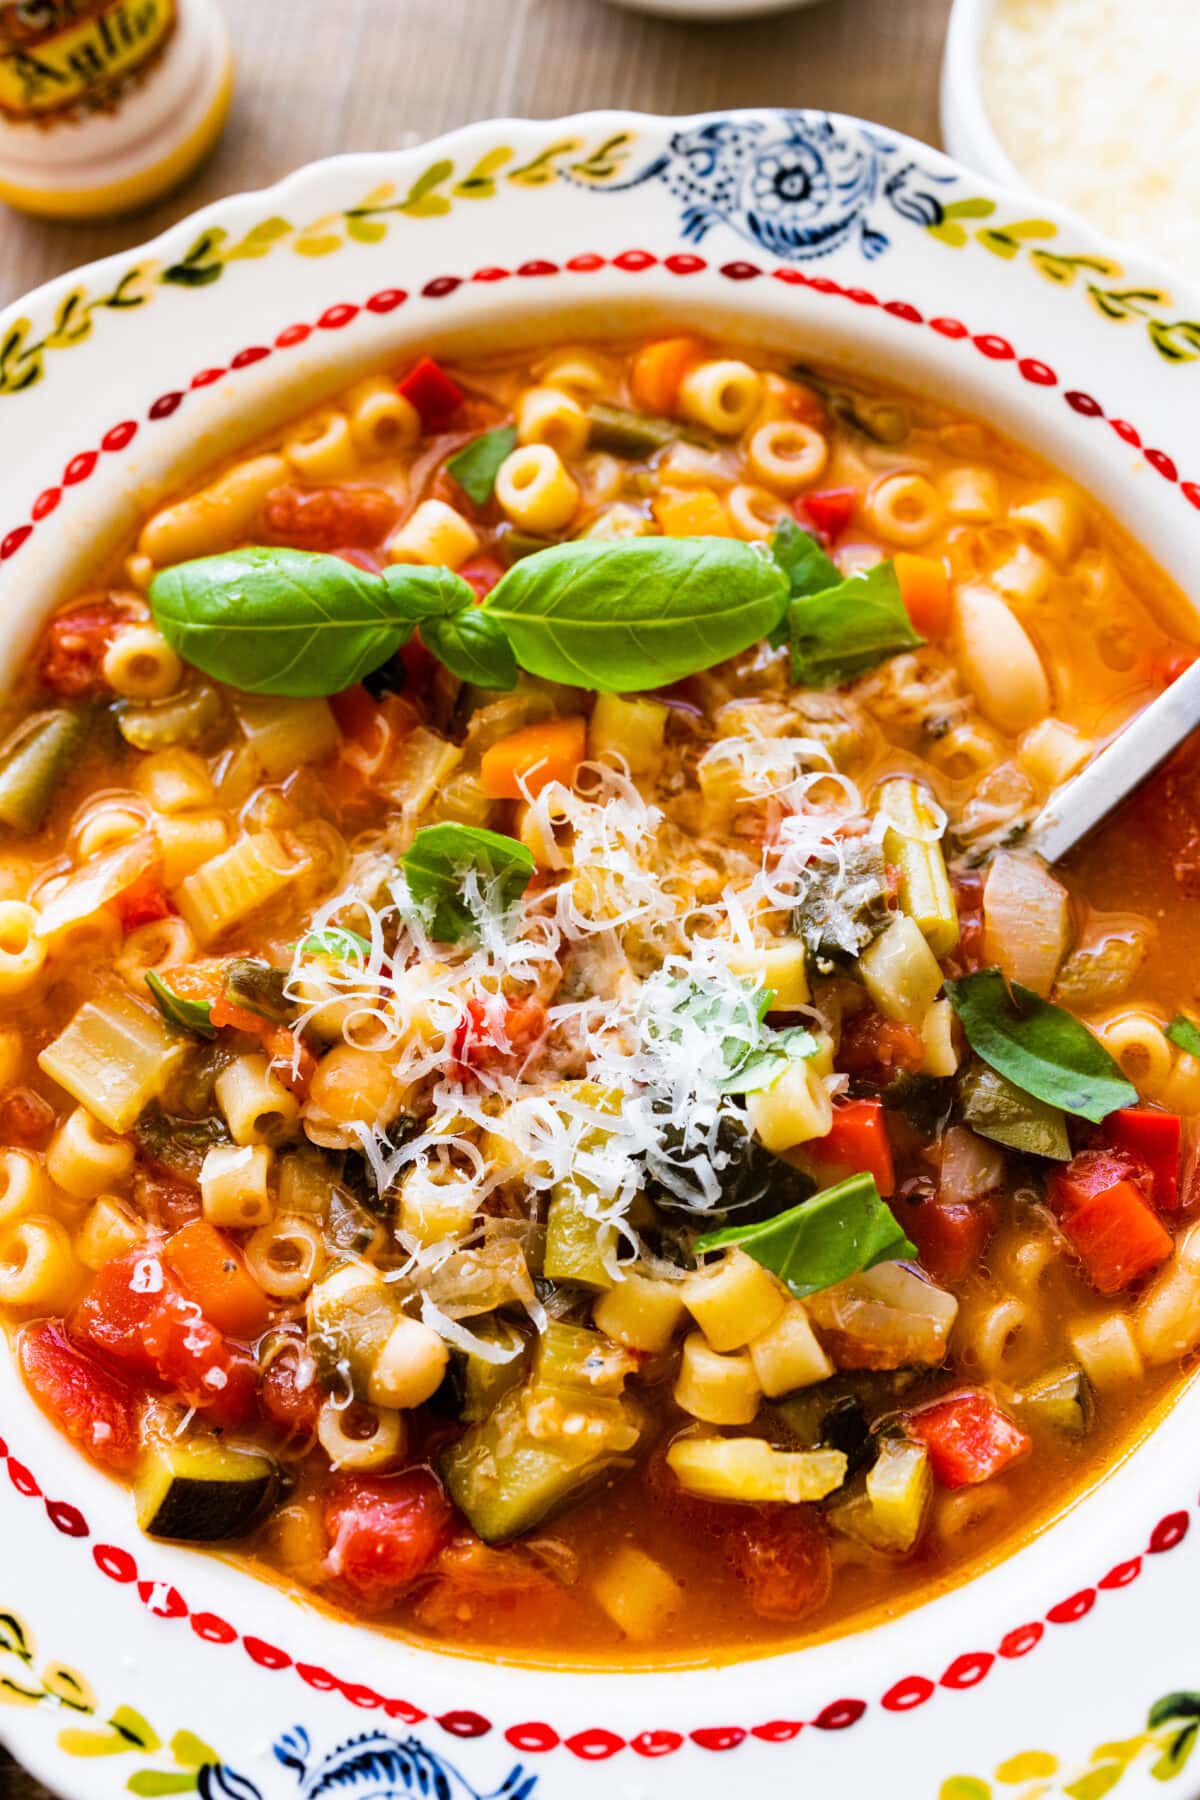 Minestrone soup with pasta in it.